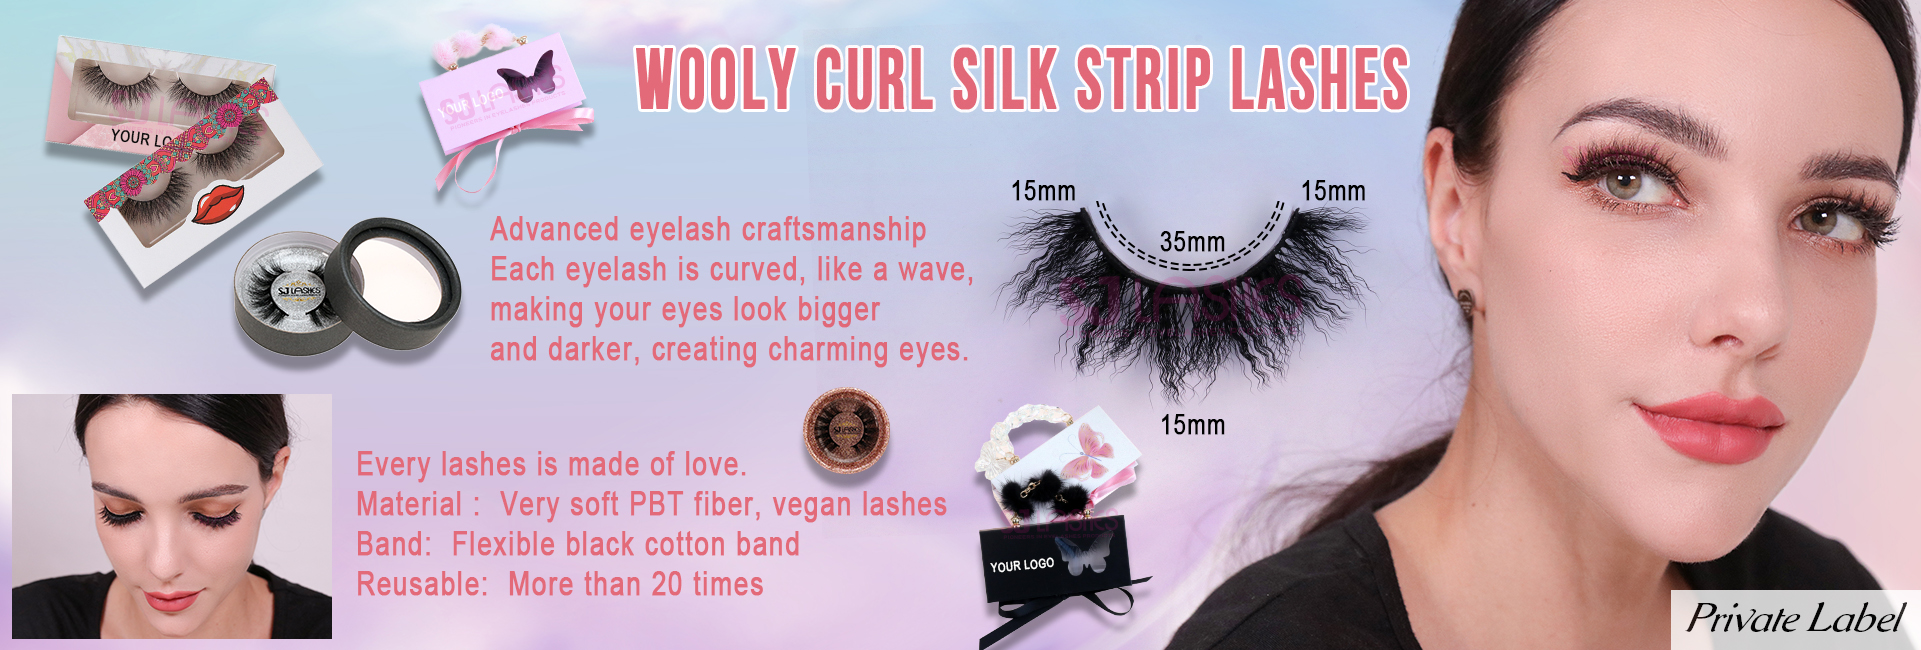 Wooly Curl Silk Strip Lashes